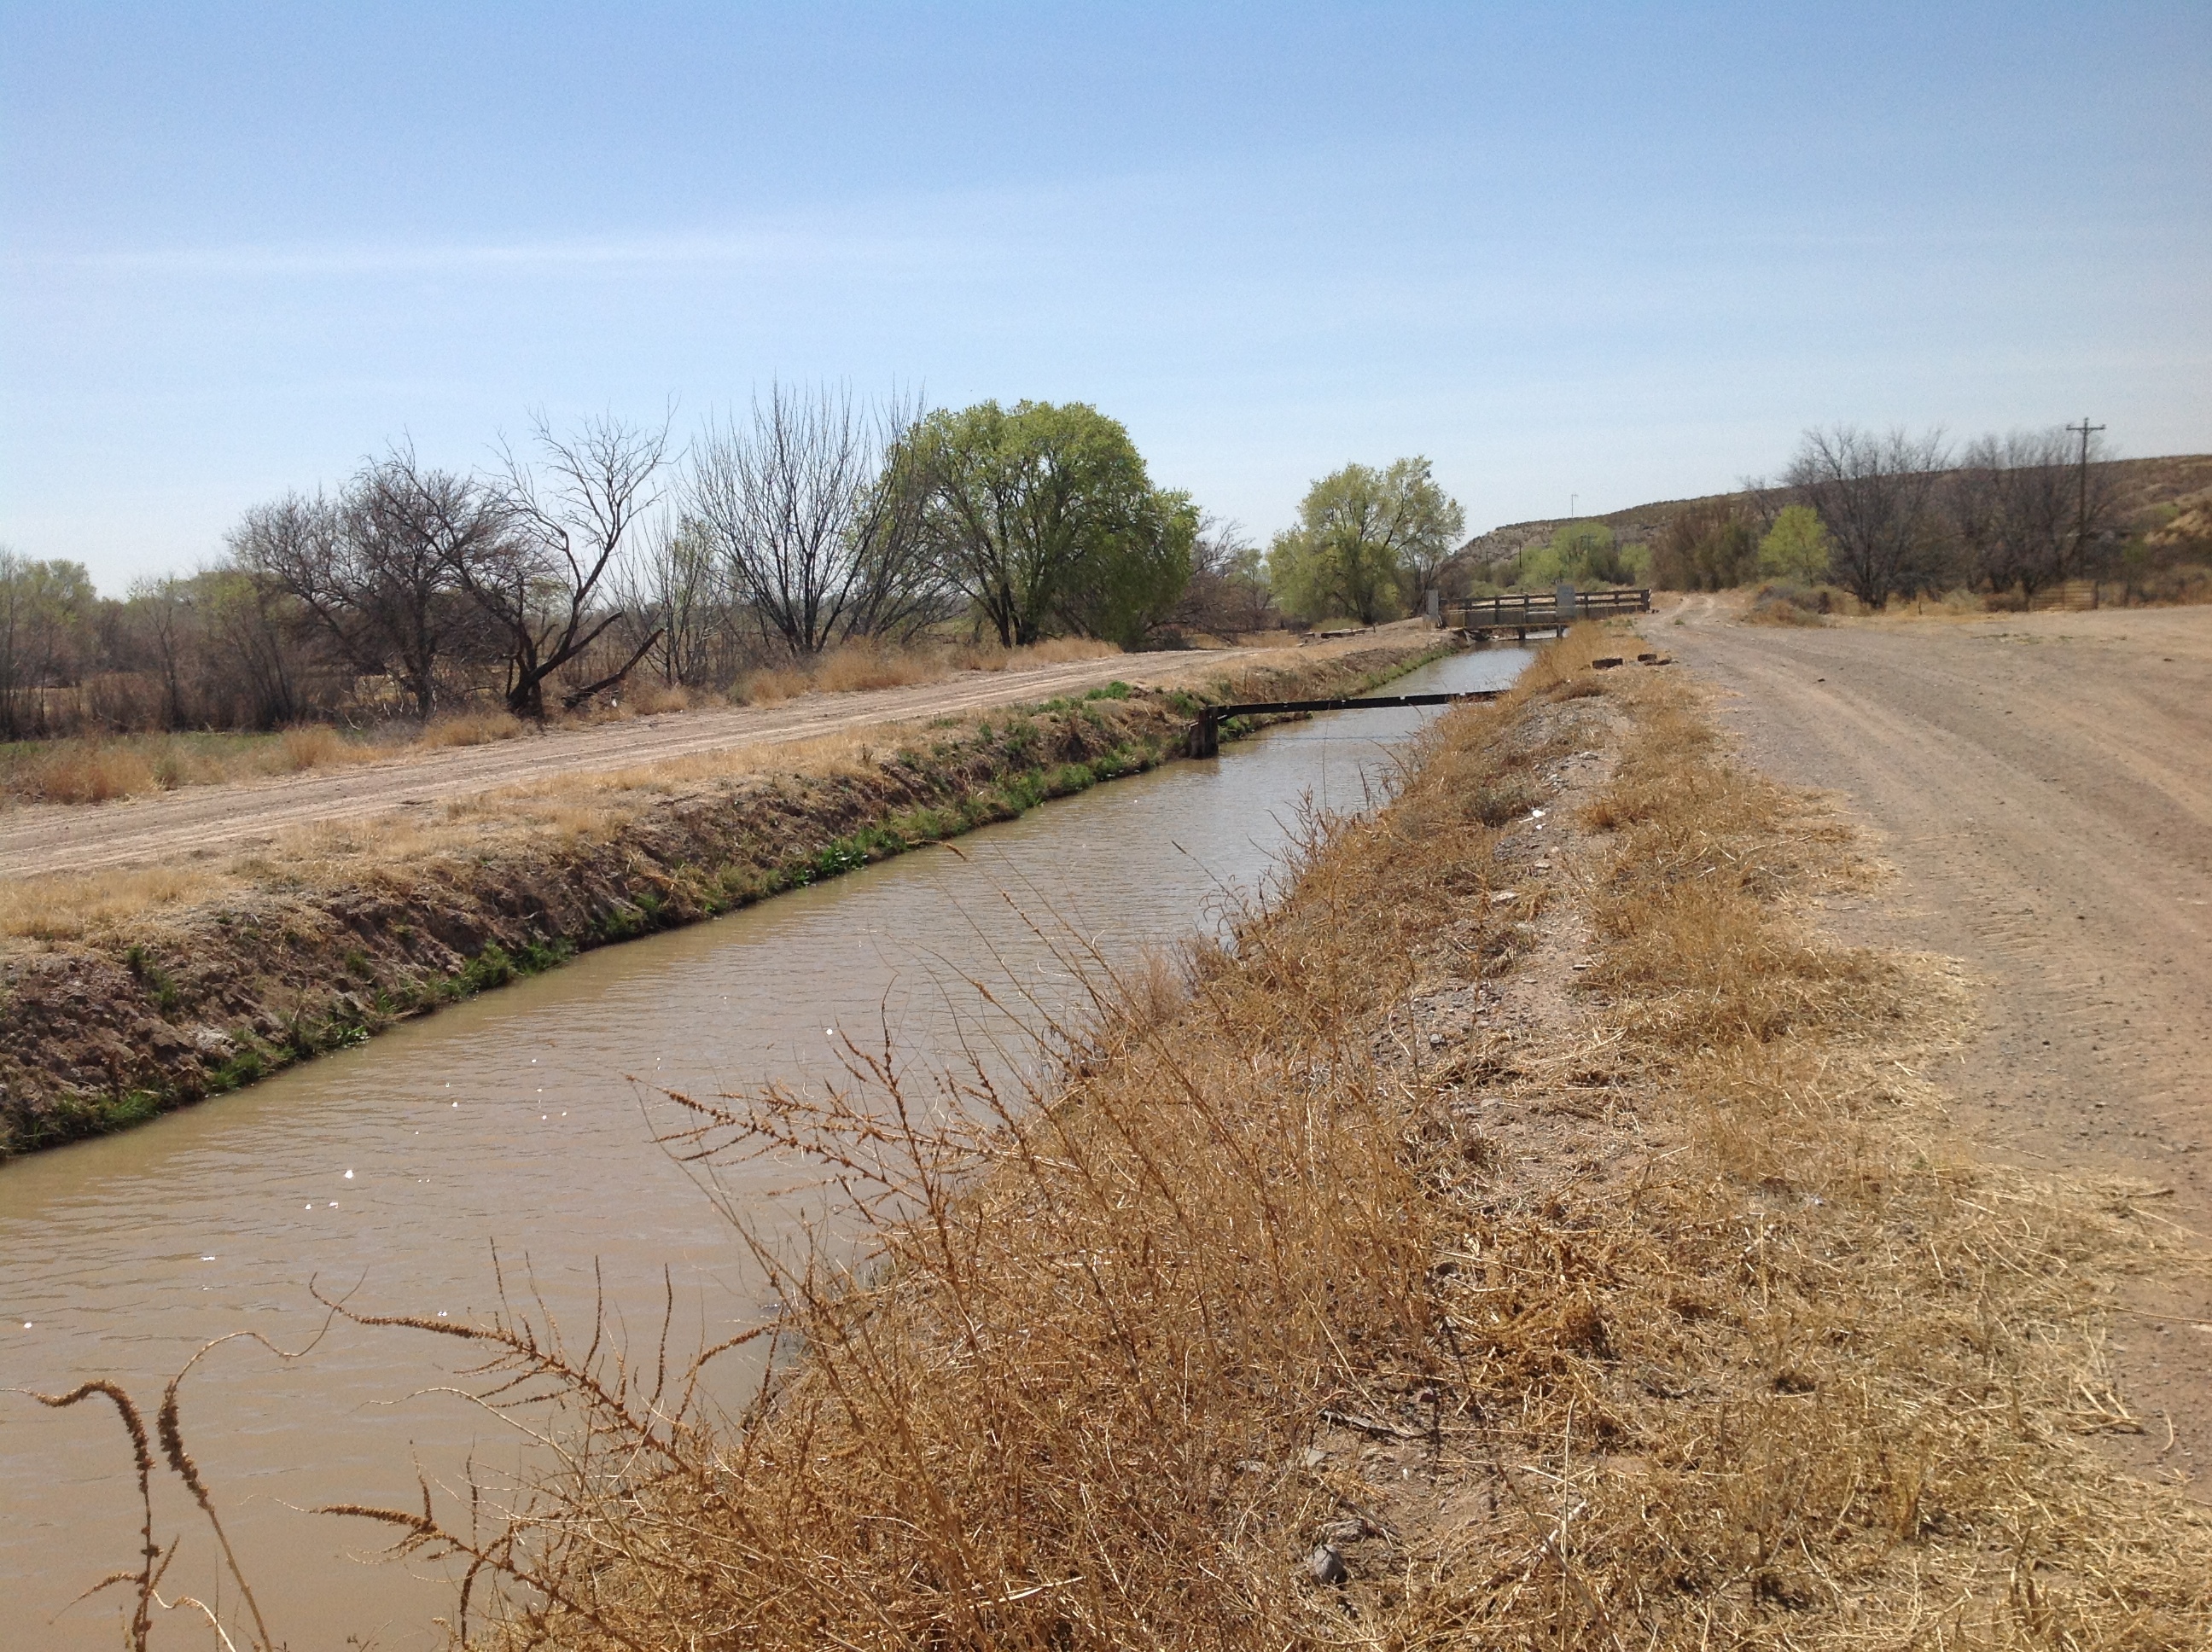 Irrigation channels near Pueblito Point at Escondida Road in Socorro County, NM